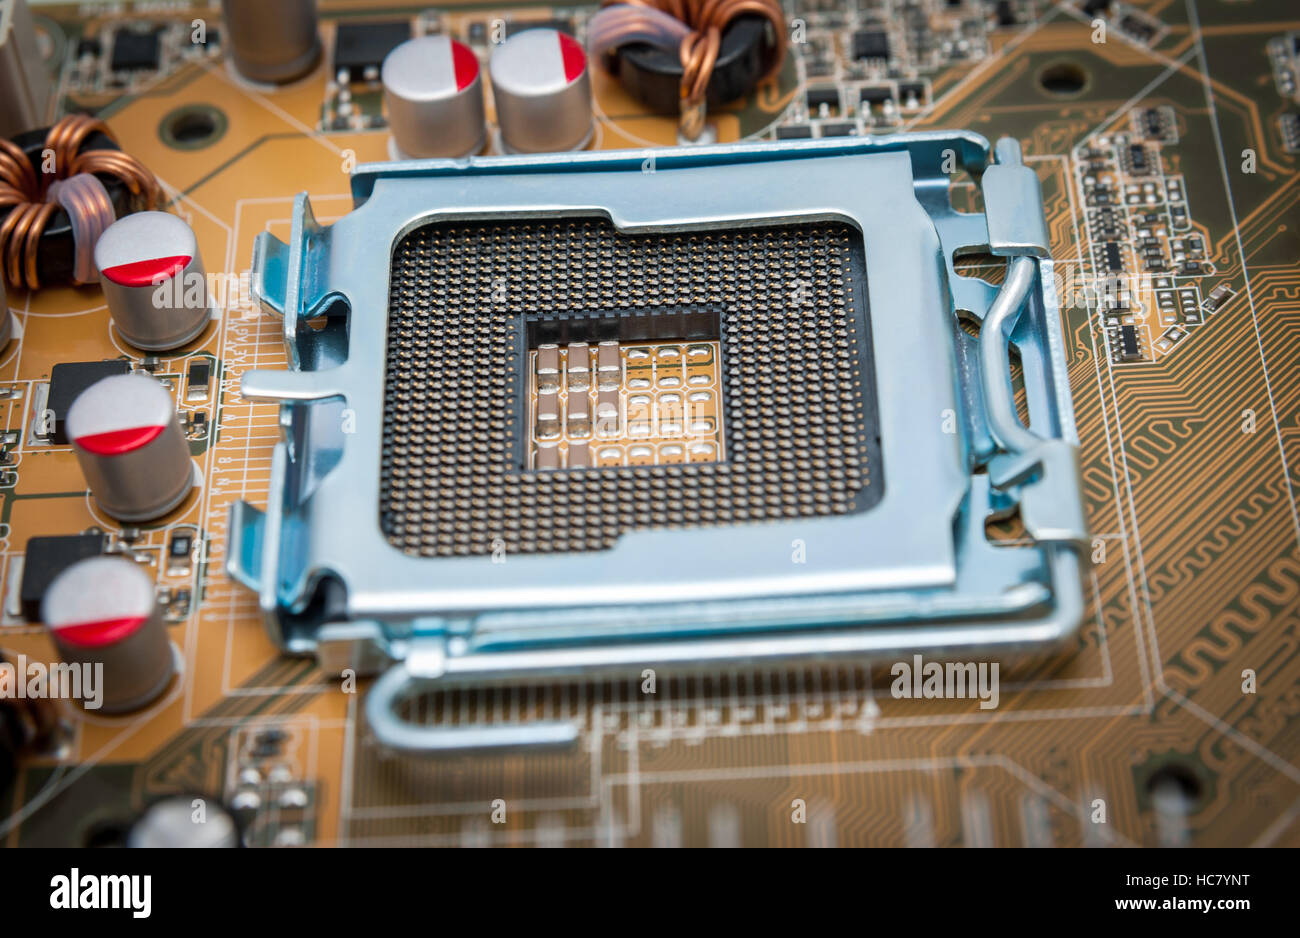 Empty CPU processor socket with pins on motherboard Stock Photo